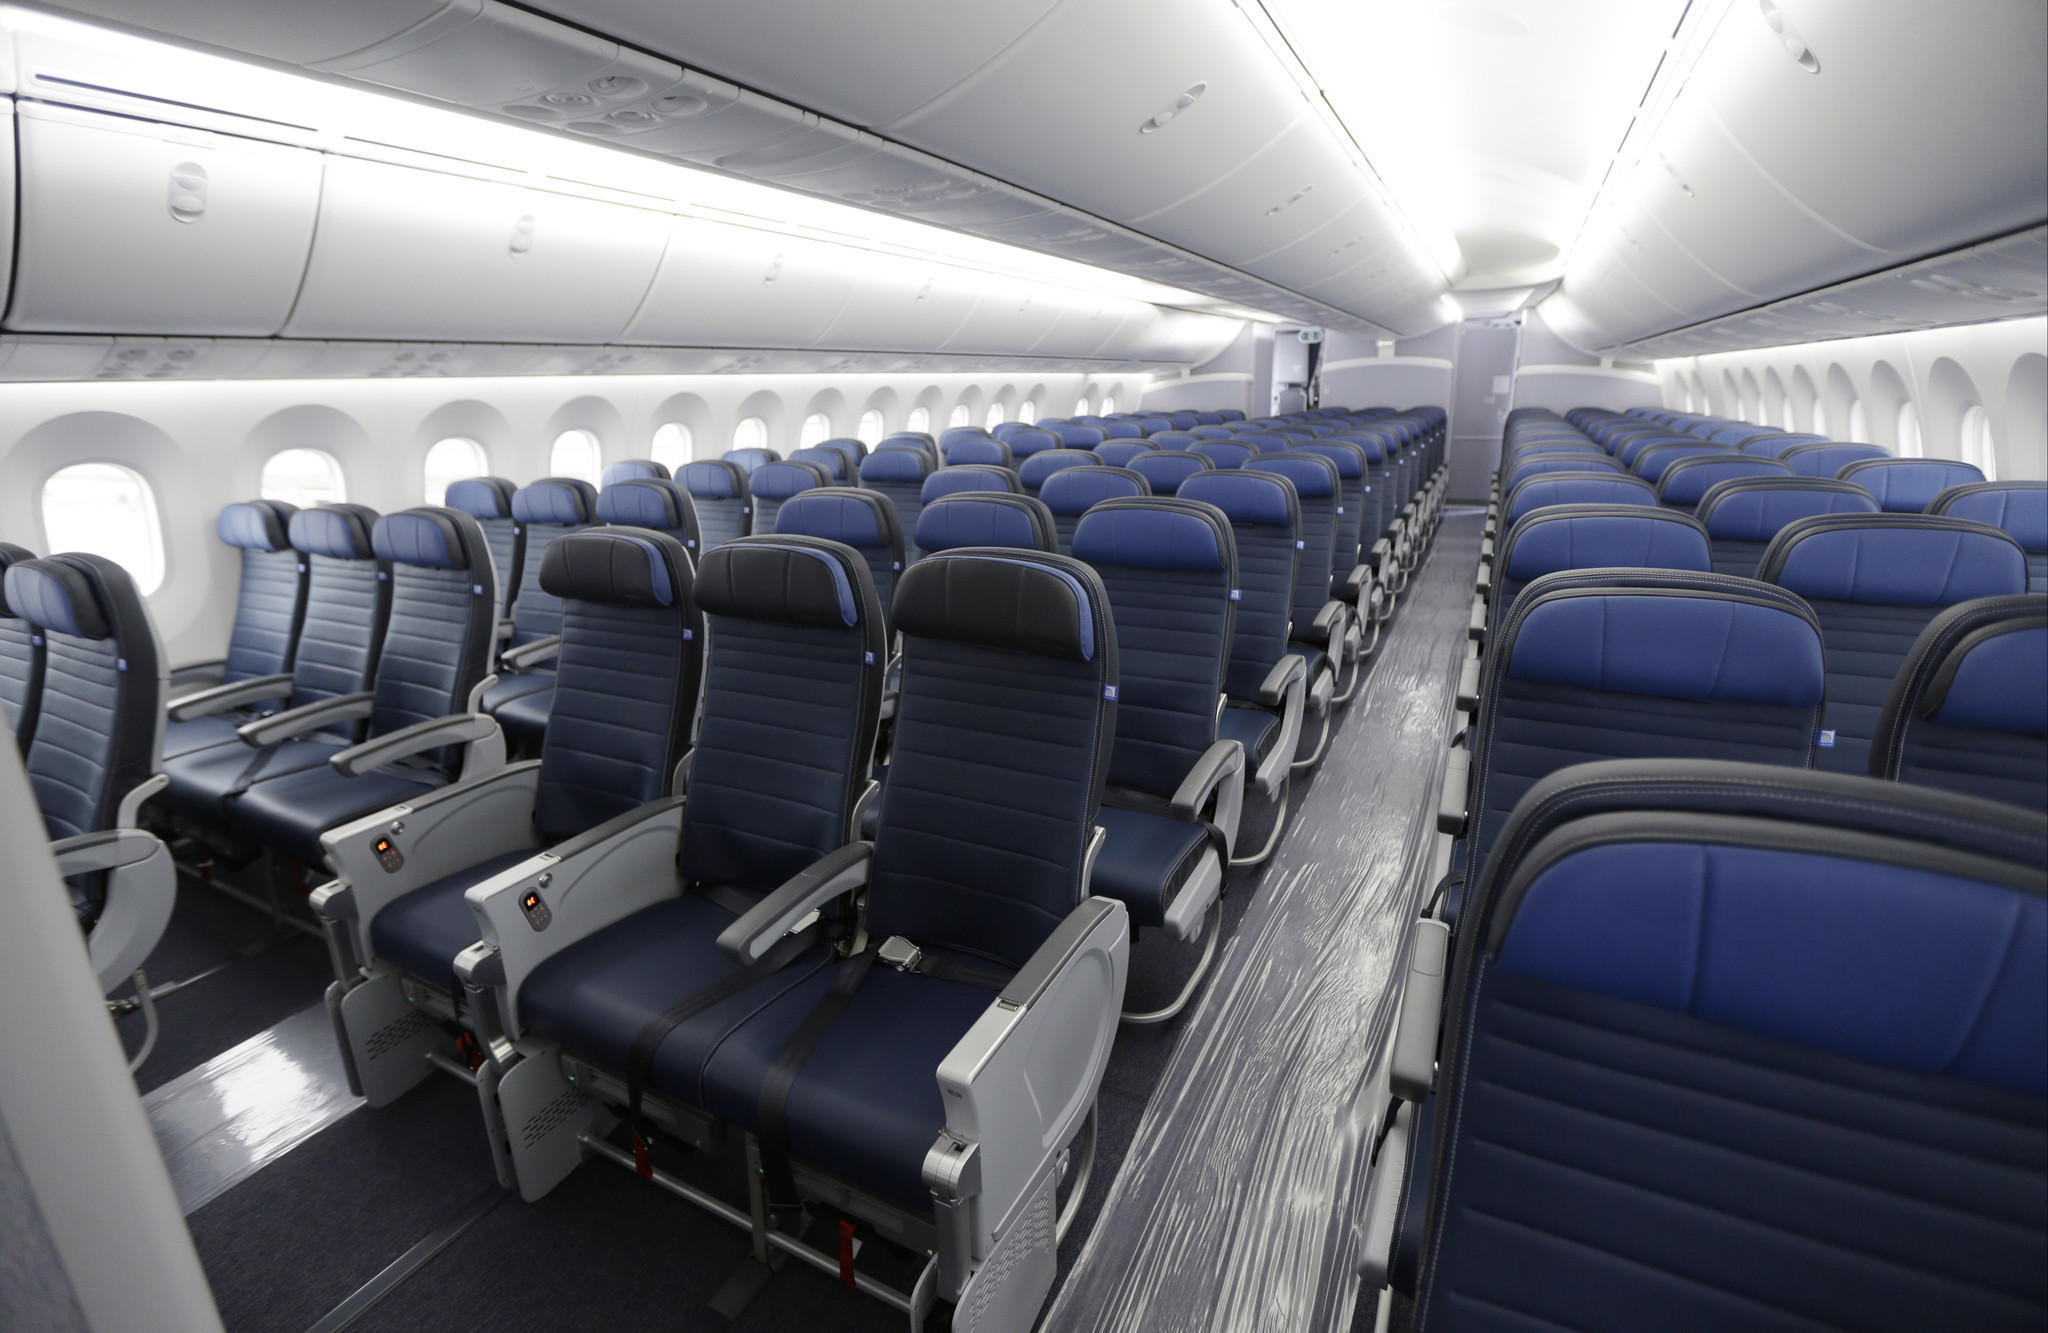 Airlines getting more aggressive about selling seat assignments